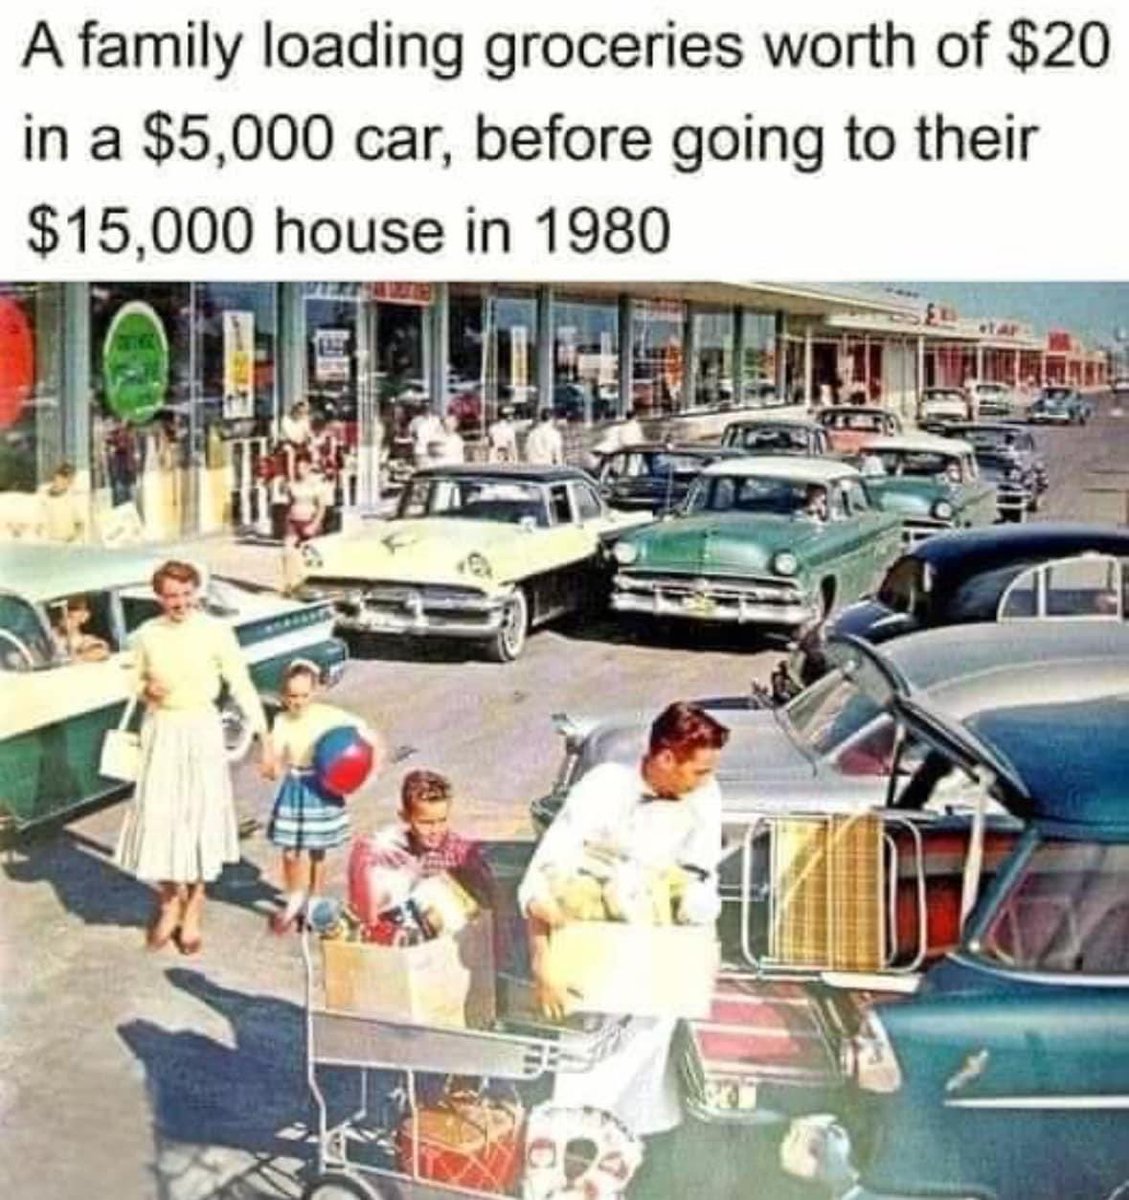 Hard to believe…those cars look older for 1980. Love the cars and the way people dressed up. The whole family also spending time and shopping together.